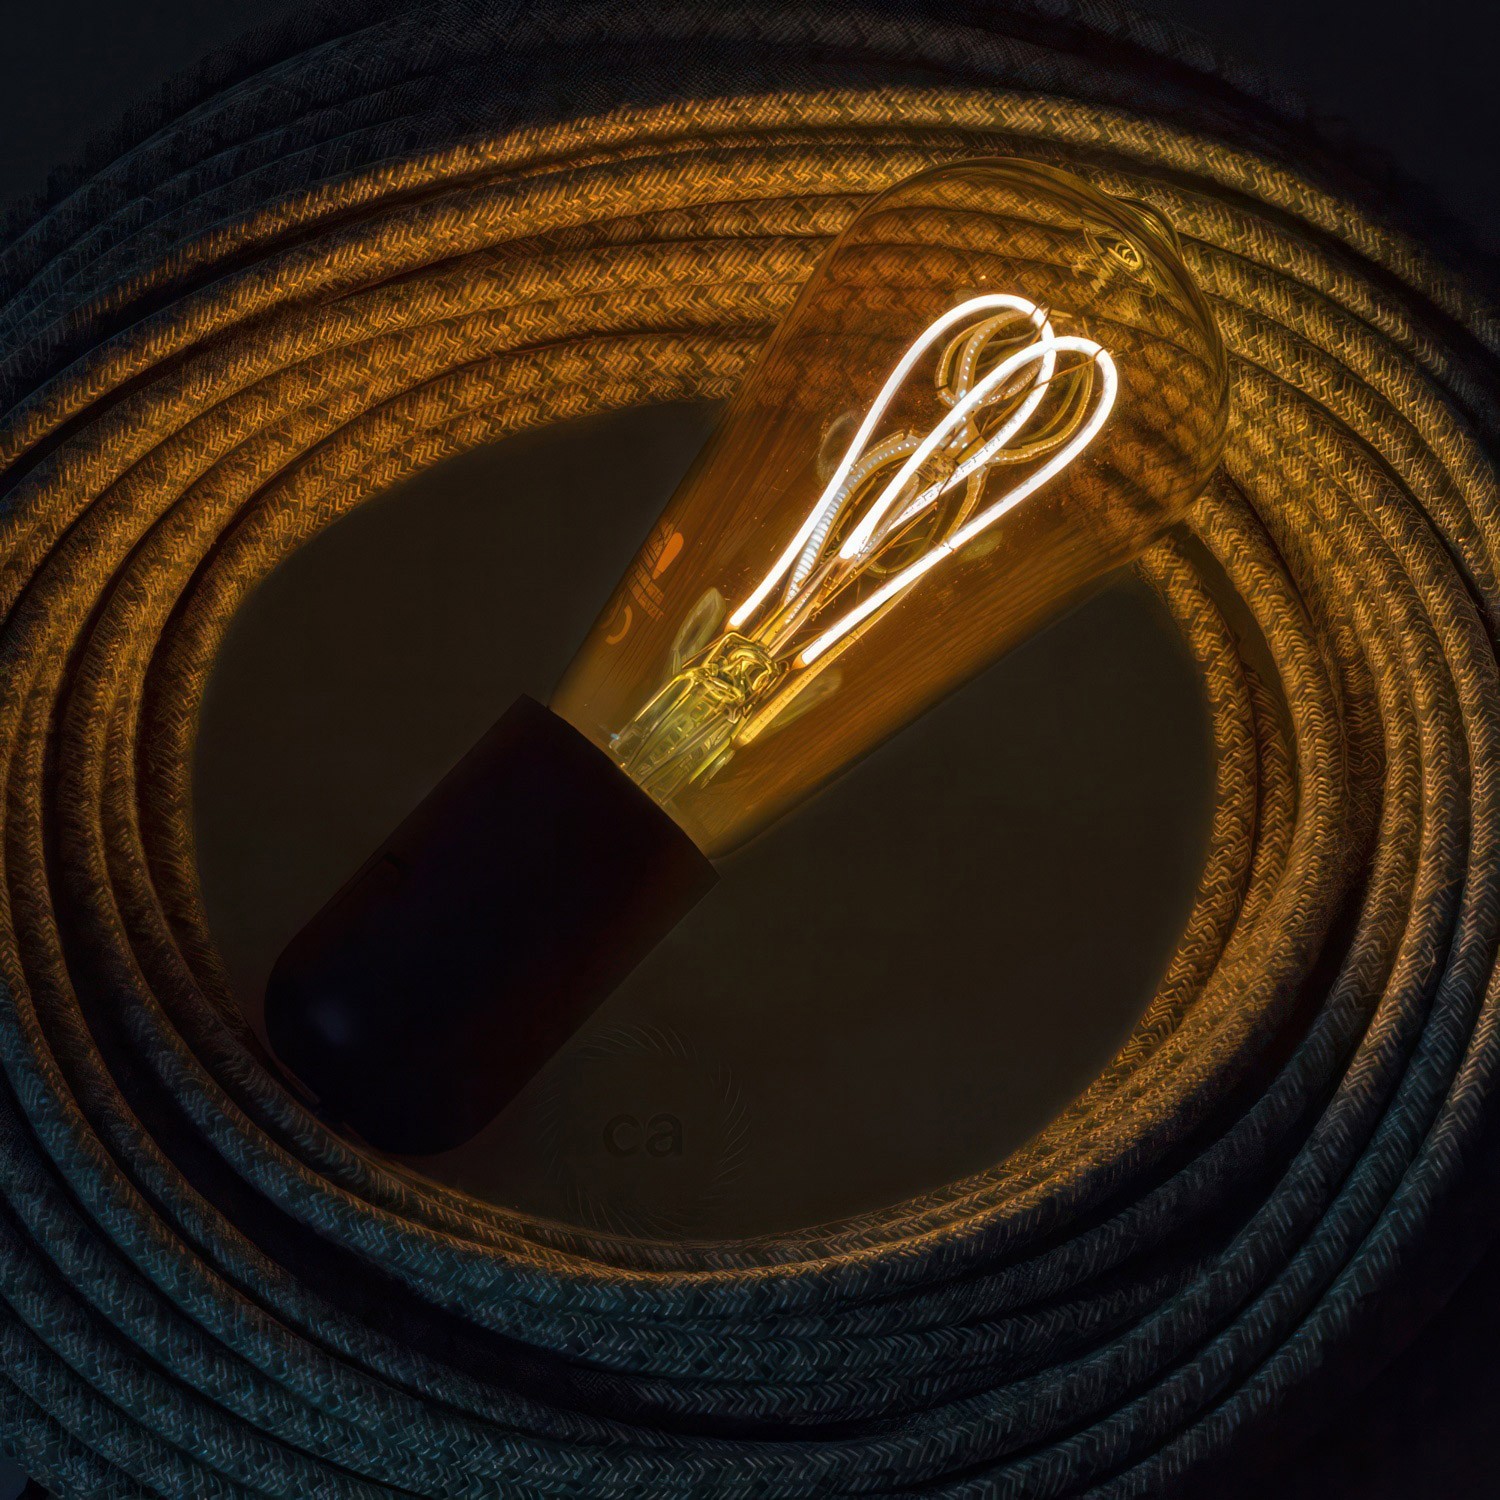 LED Golden Light Bulb - Edison ST64 Curved Double Loop Filament - 4W 250Lm E27 1800K Dimmable